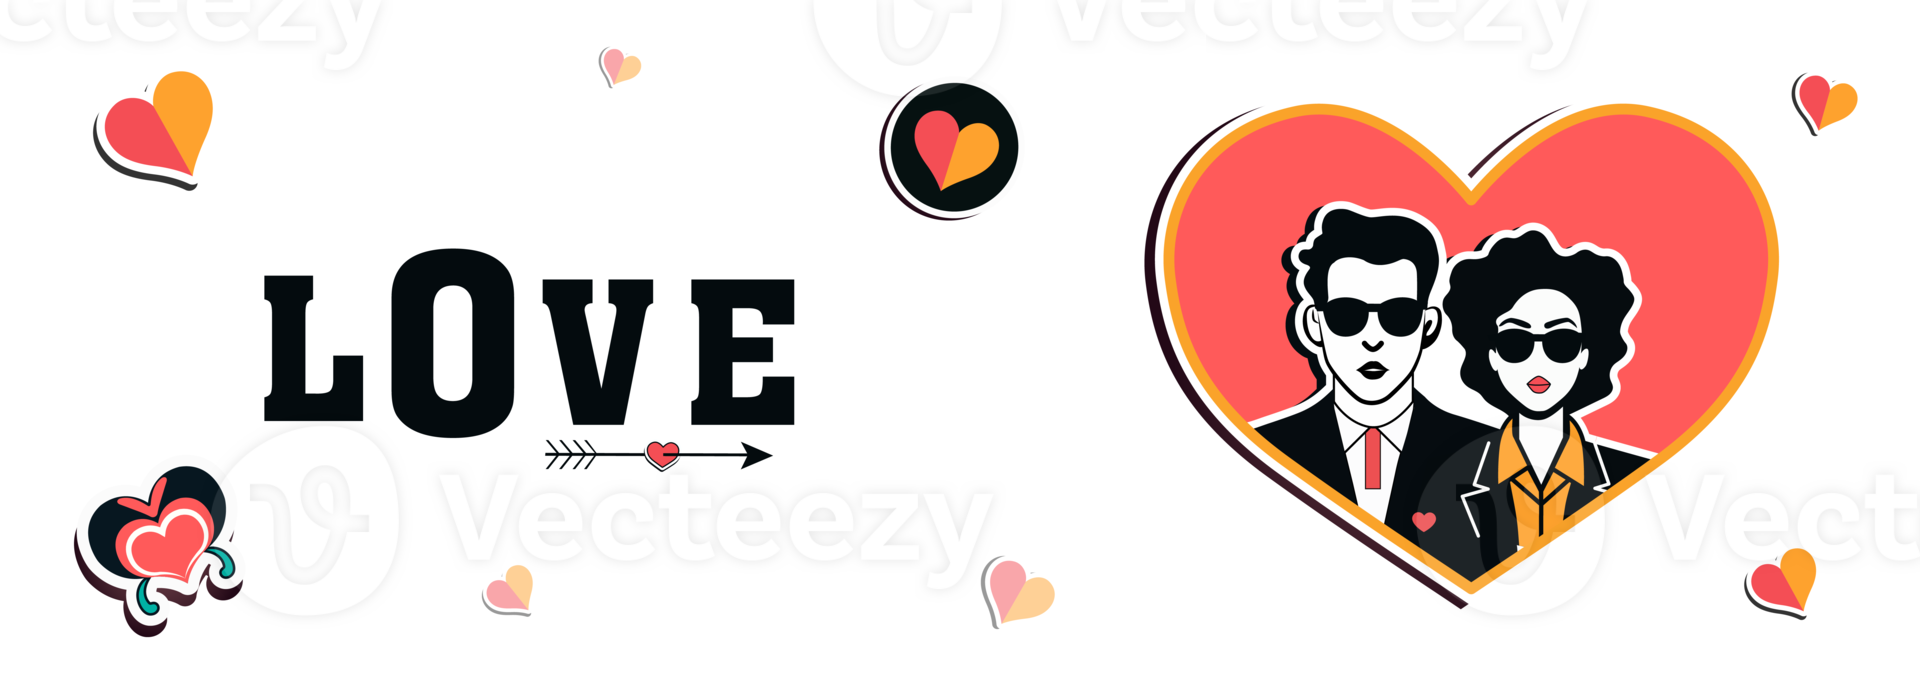 Love Banner or Header Design With Modern Couple Character Inside Heart Shape. Happy Valentine's Day Concept. png